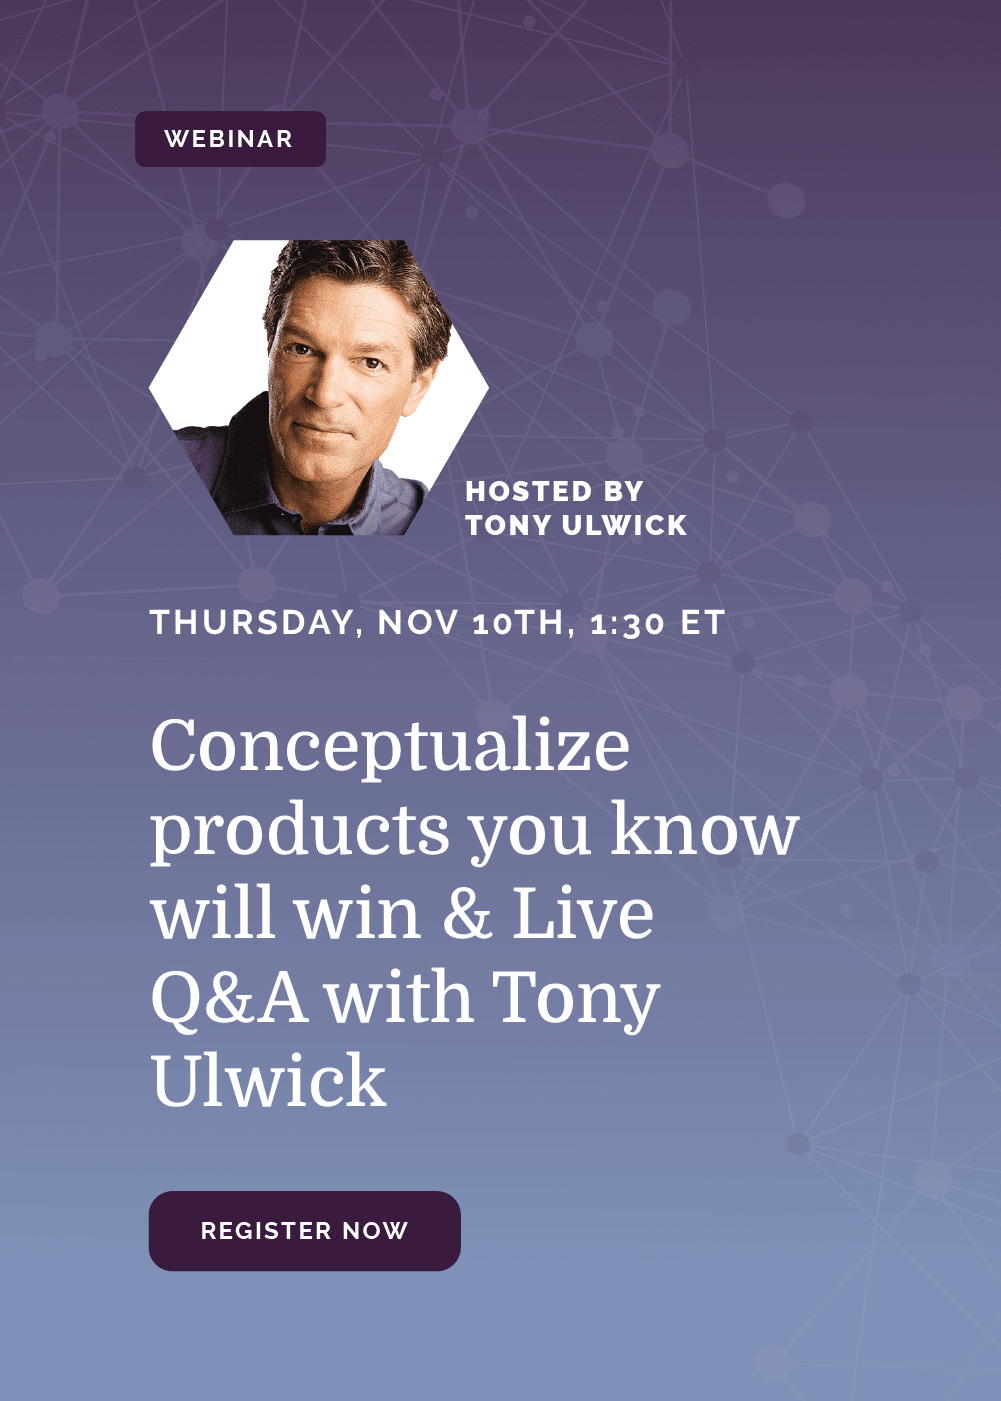 Conceptualize products you know will win webinar image